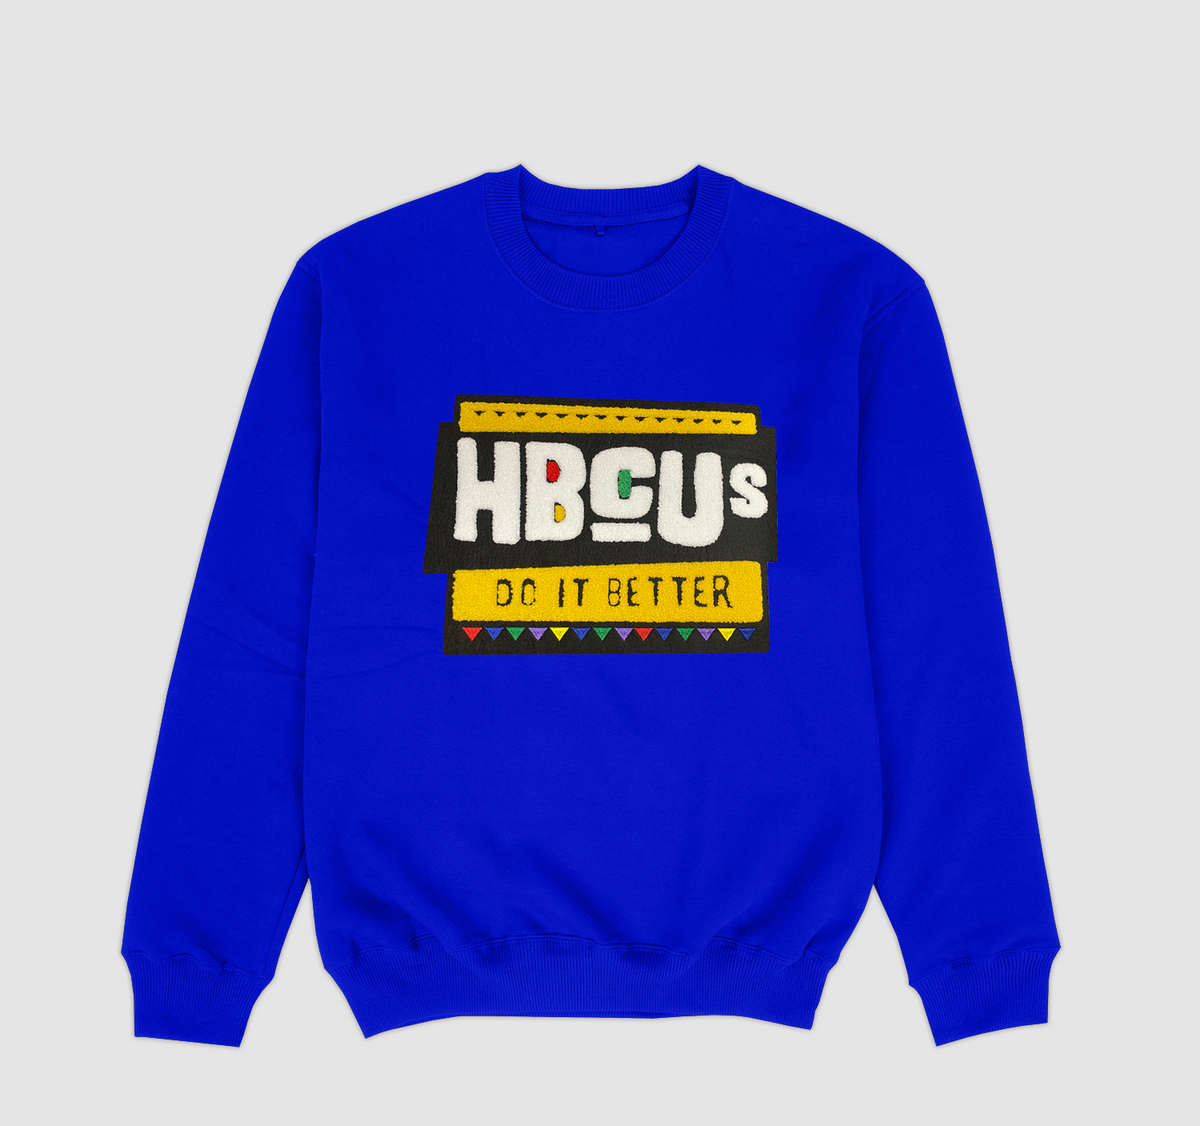 ROYAL BLUE SWEATSHIRT WITH St. Gregory The Great CHENILLE LOGO